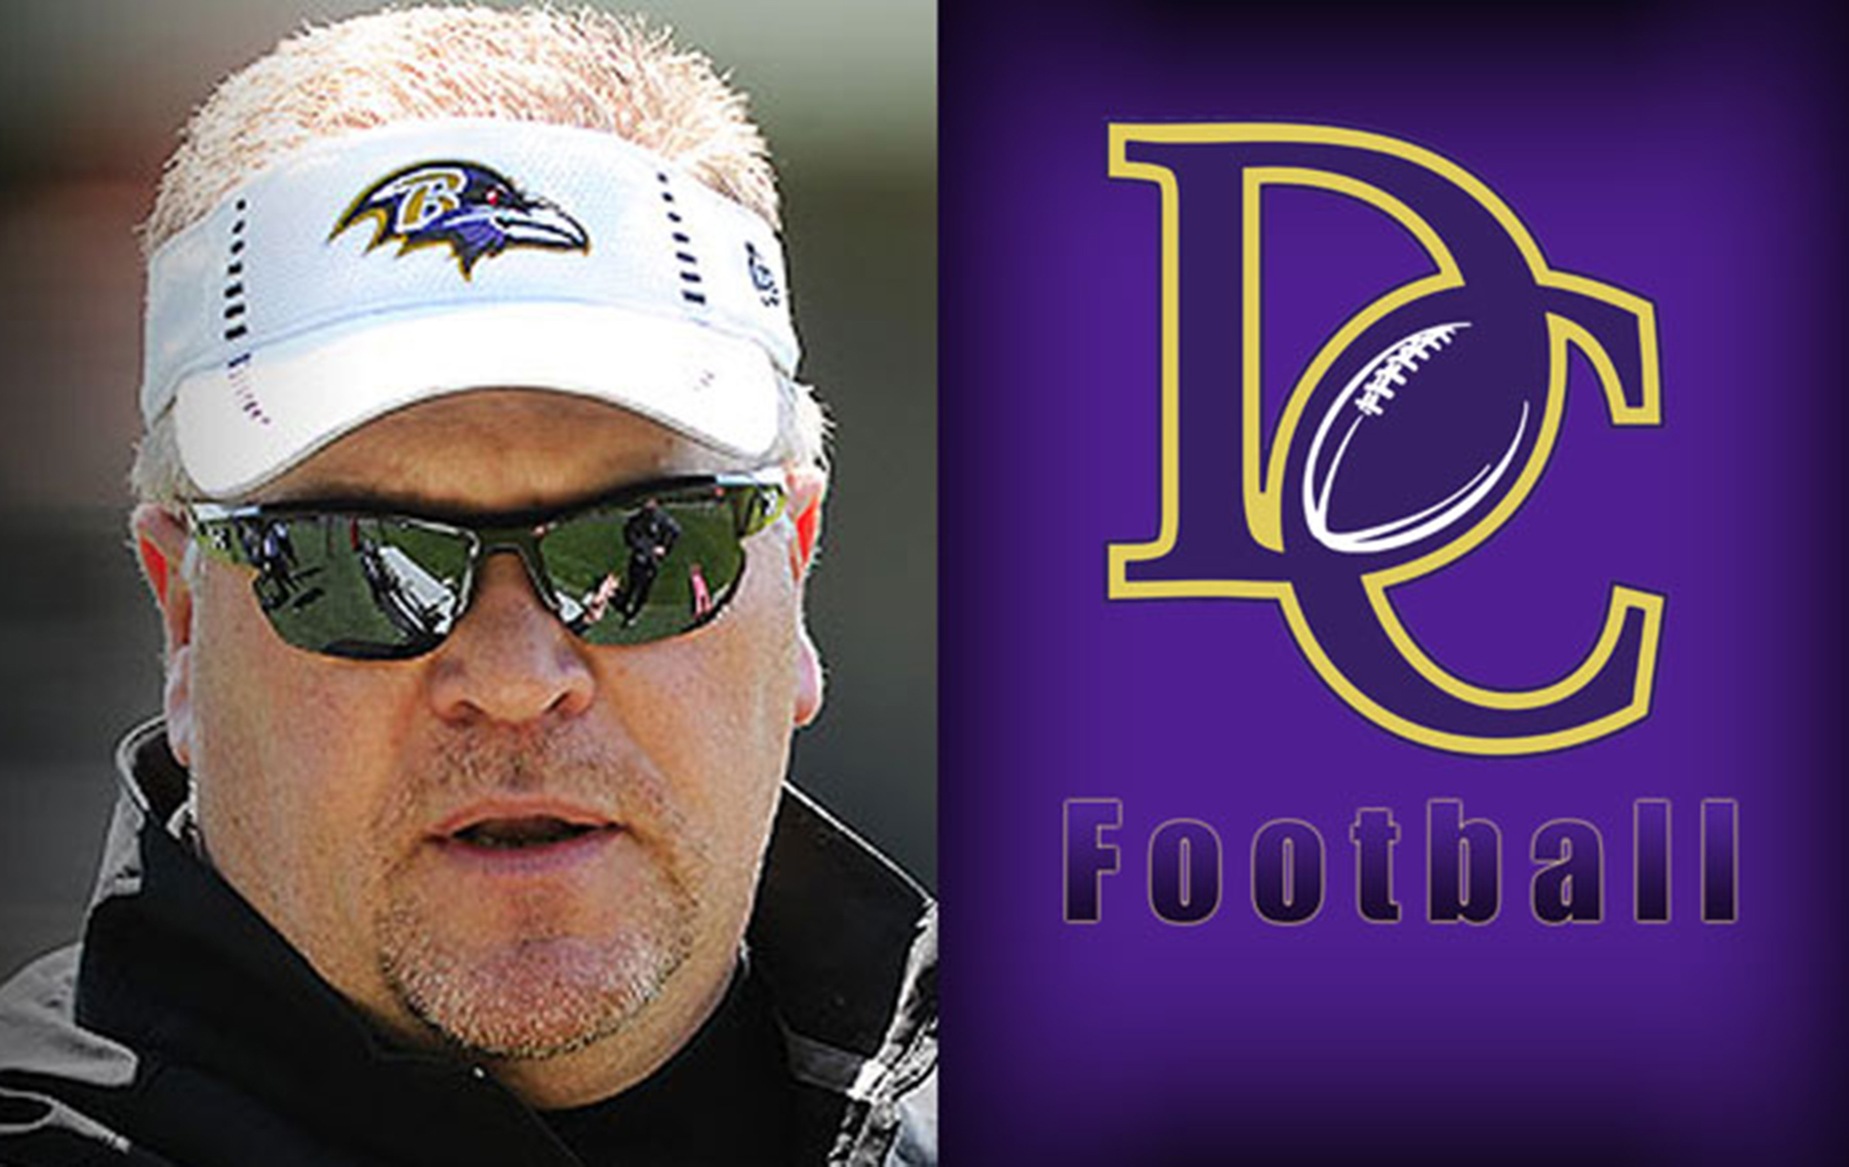 Former Defiance College Product Set to Coach in Super Bowl